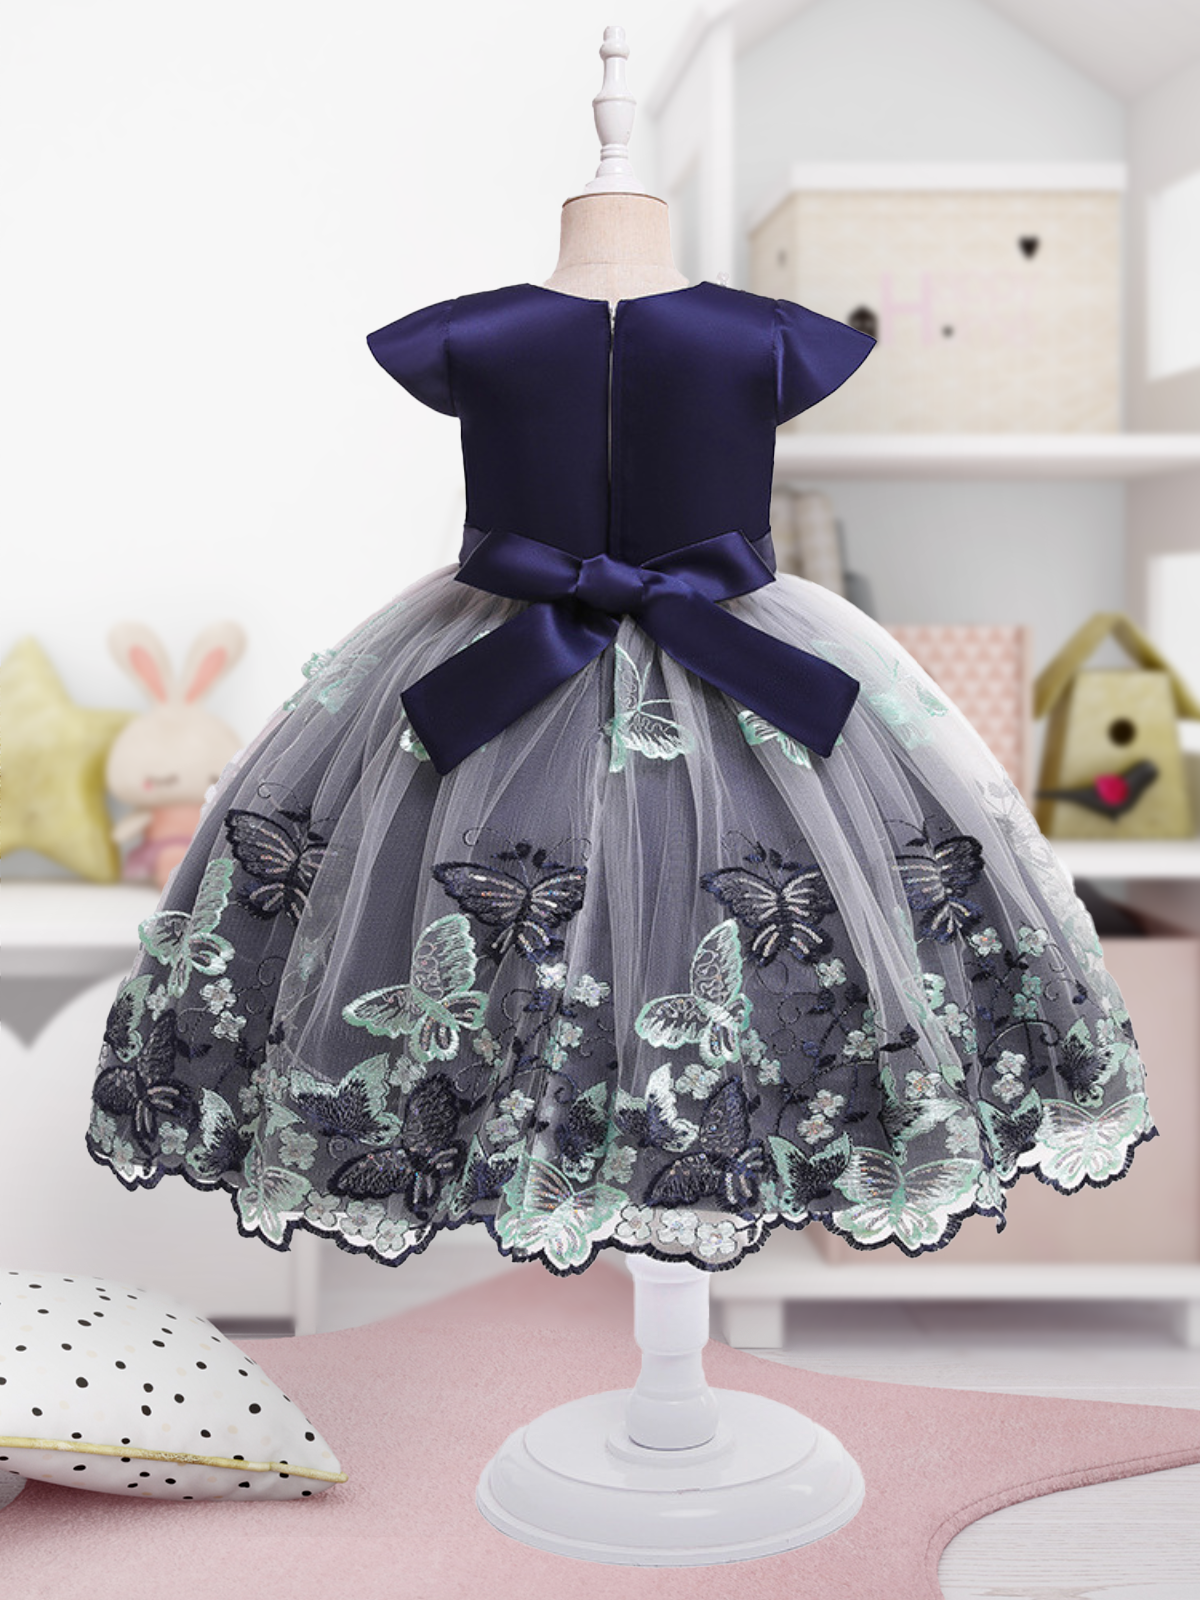 Girls Formal Dresses | Butterfly Lace Embroidered Princess Dress